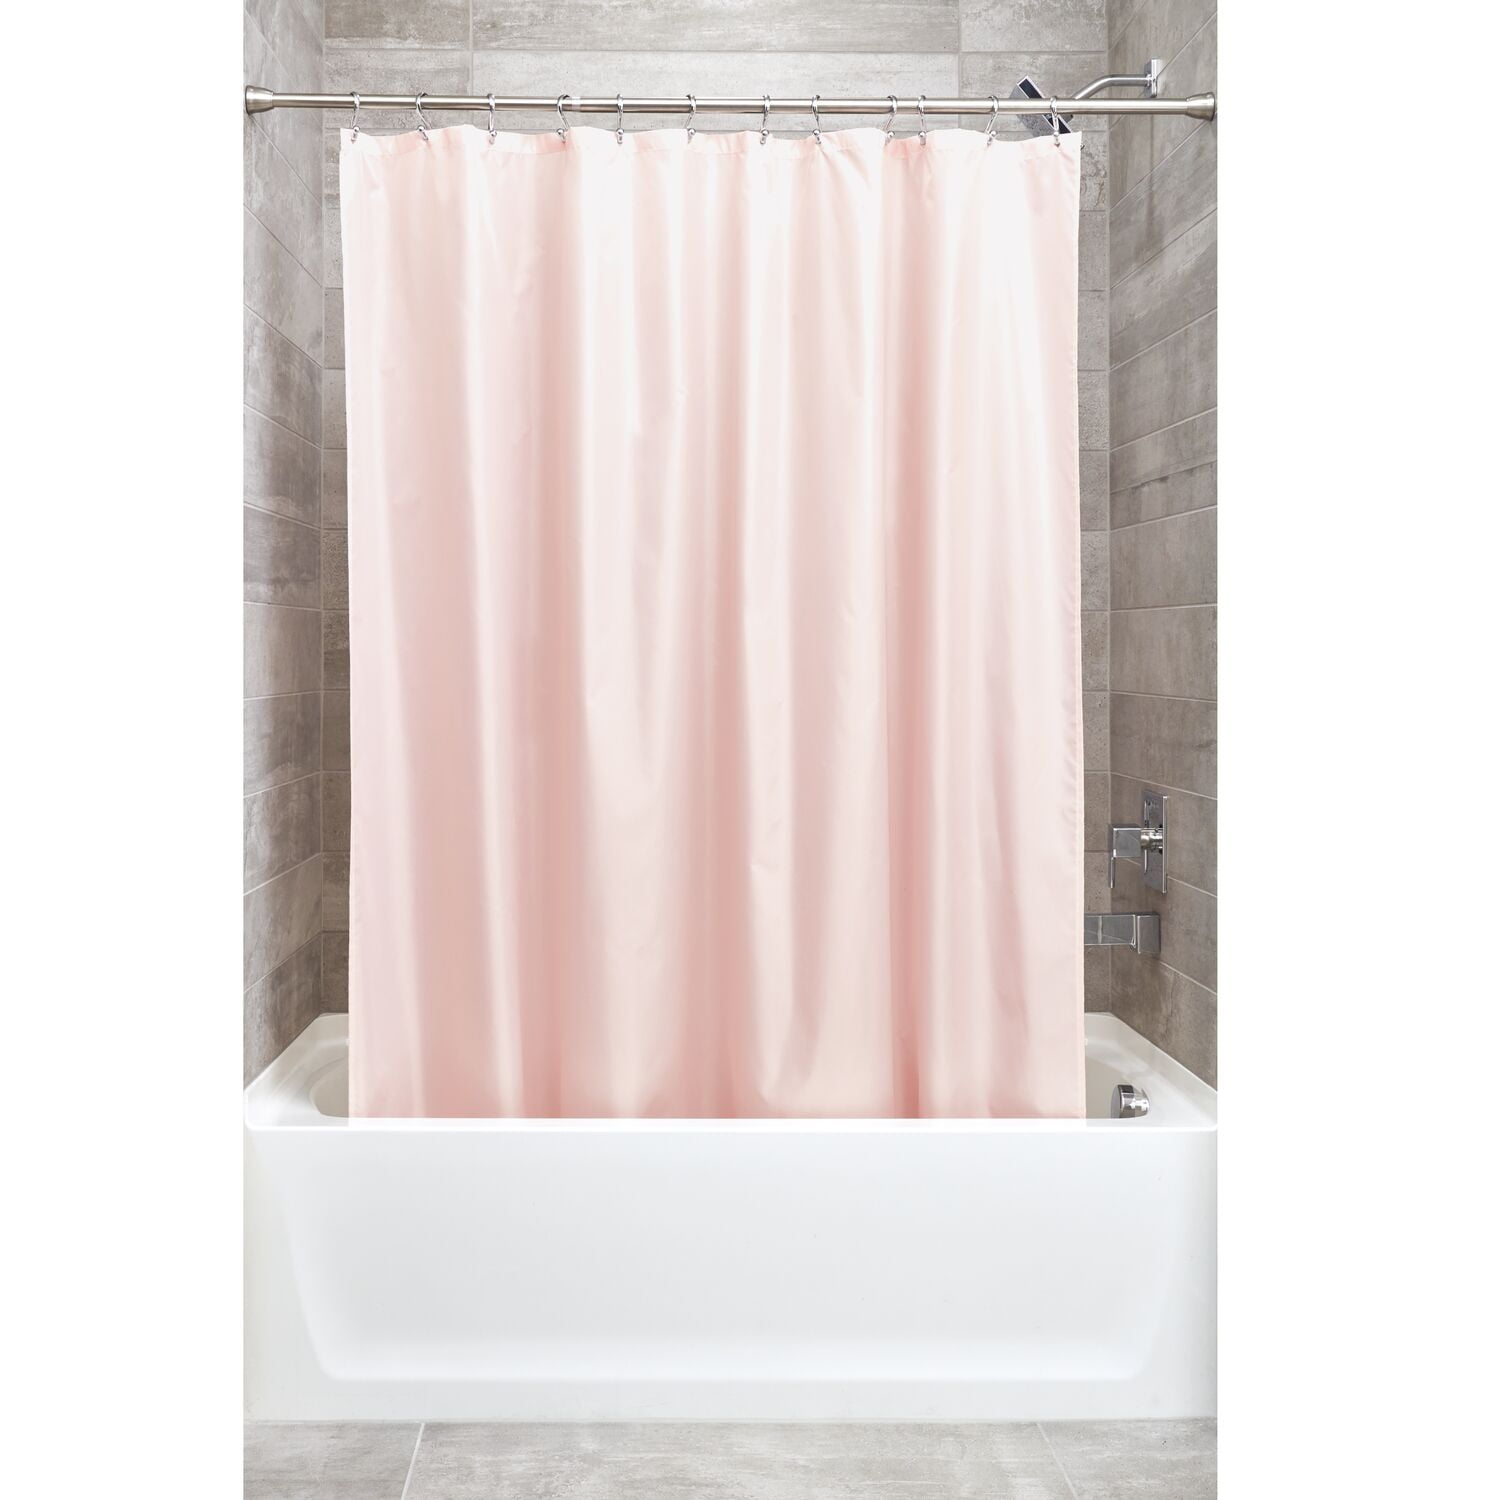 Details about   Watercolor Purple Pink Corals Starfish Waterproof Fabric Shower Curtain Set 72" 